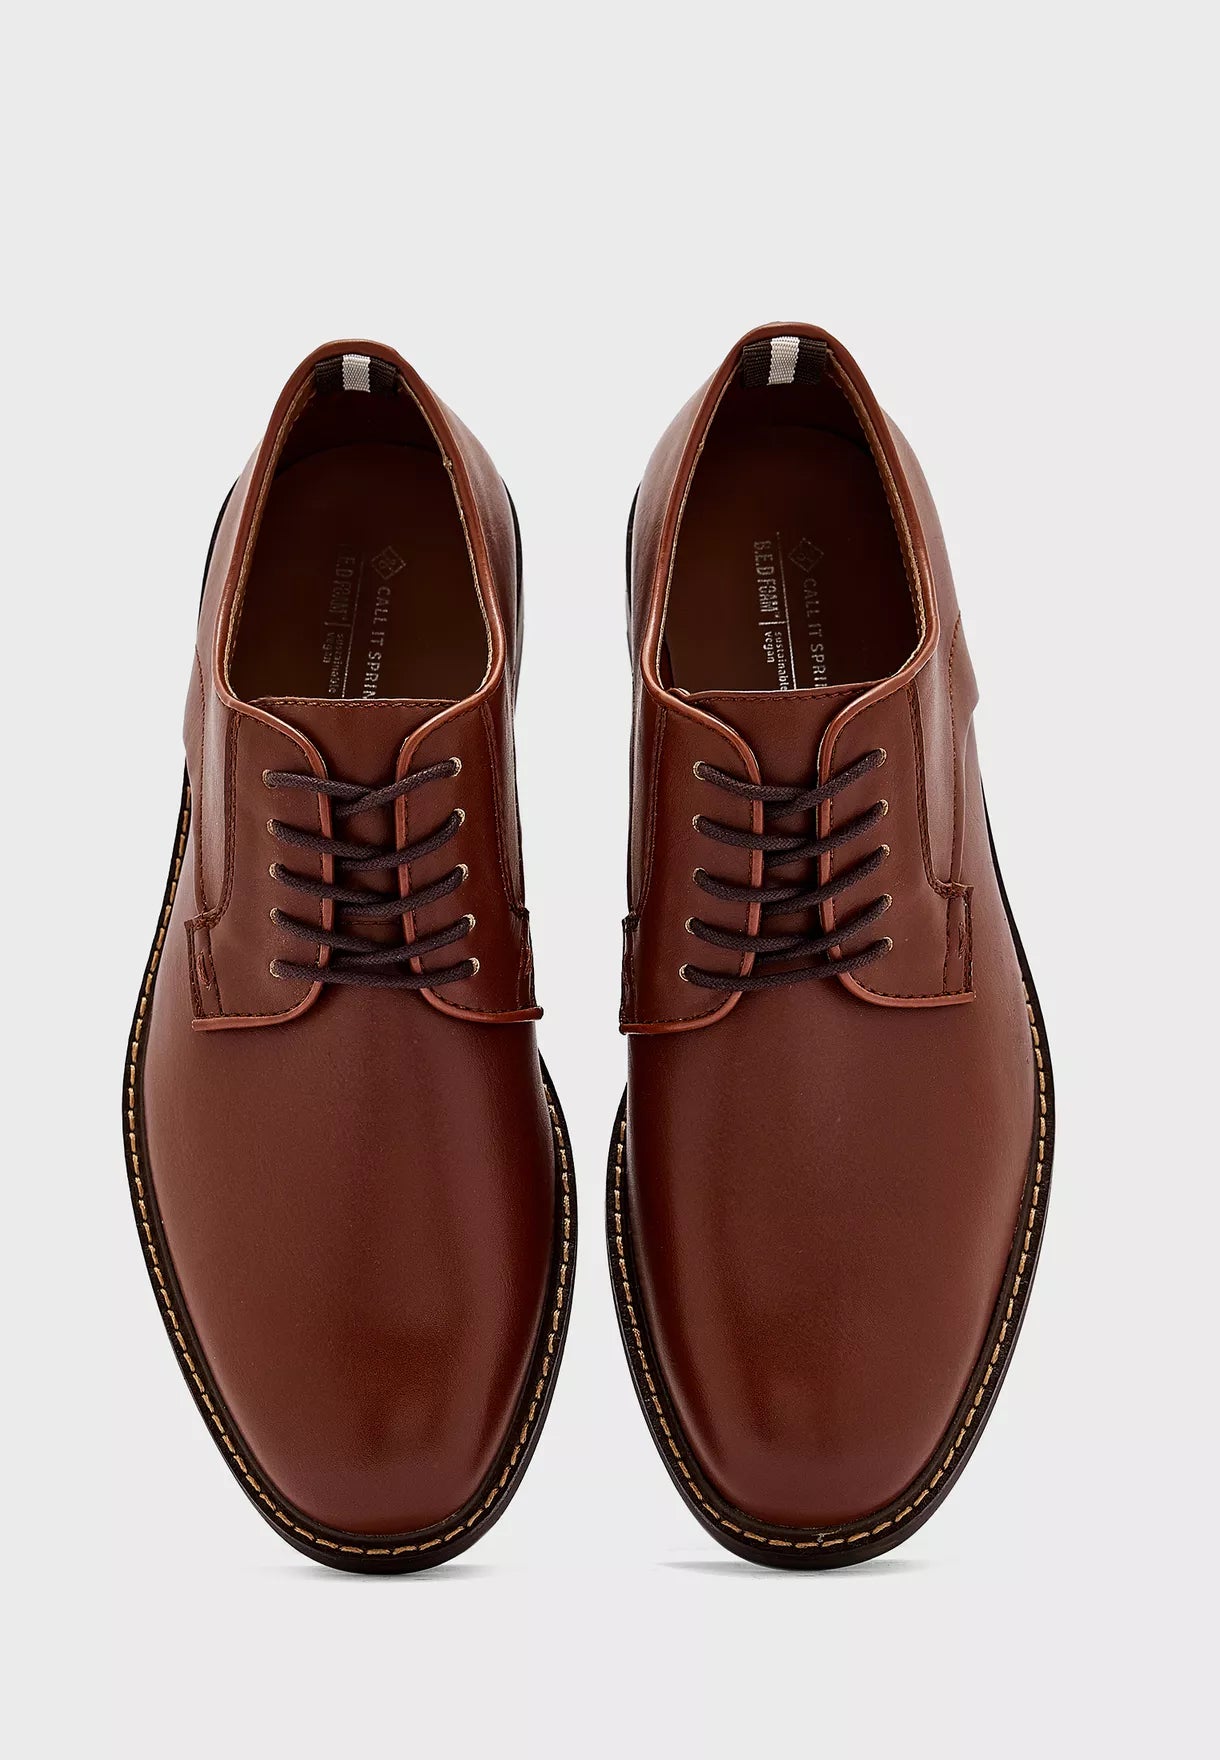 Lace Ups Formal Shoes